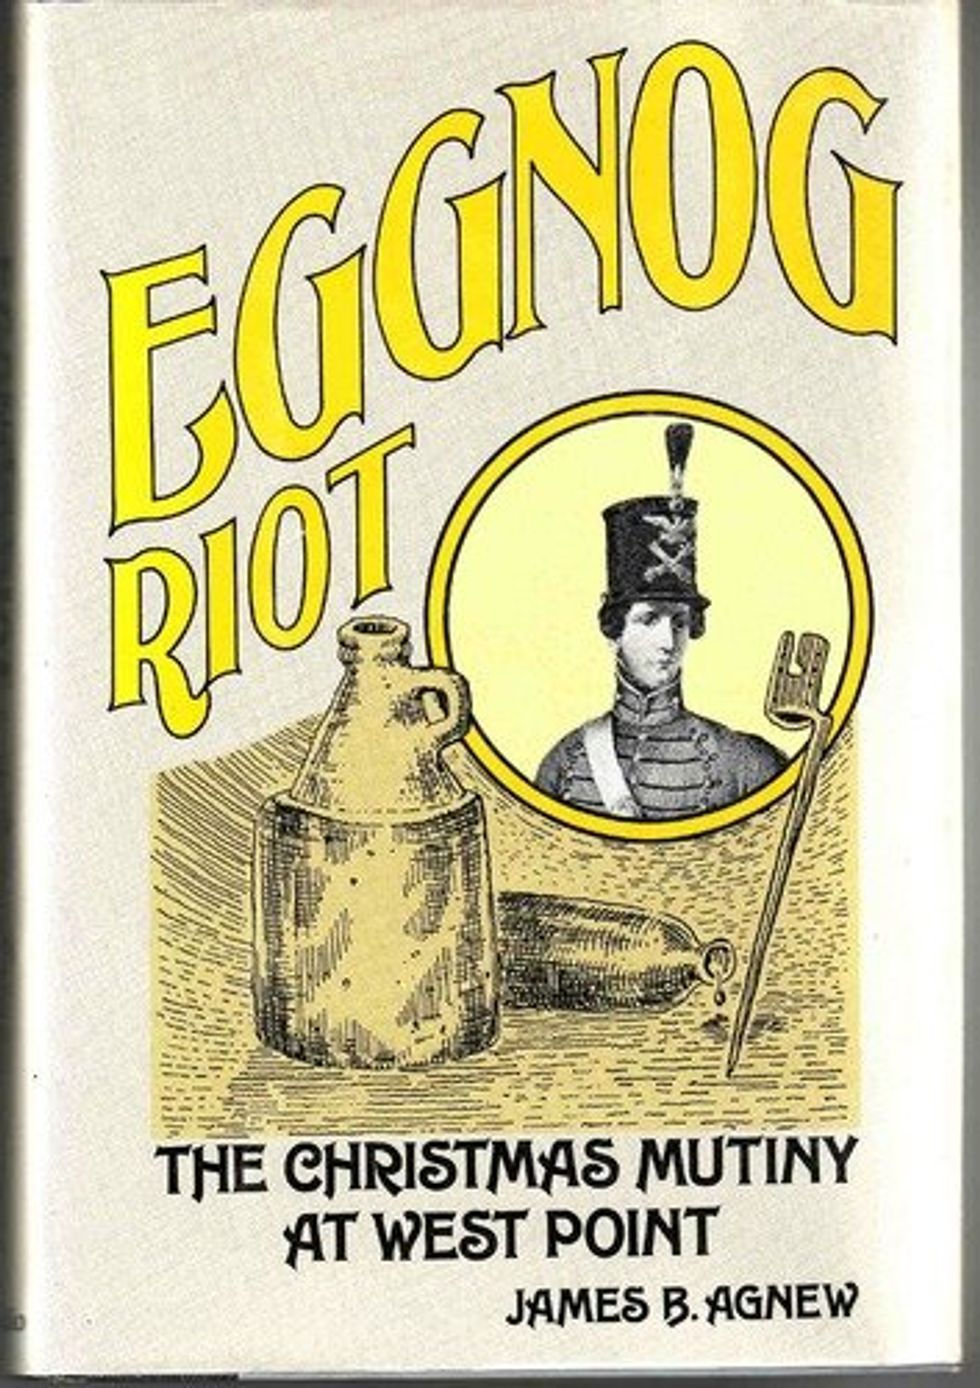 This Holiday, Start Your Own Eggnog Riot With Our Handy Recipe!